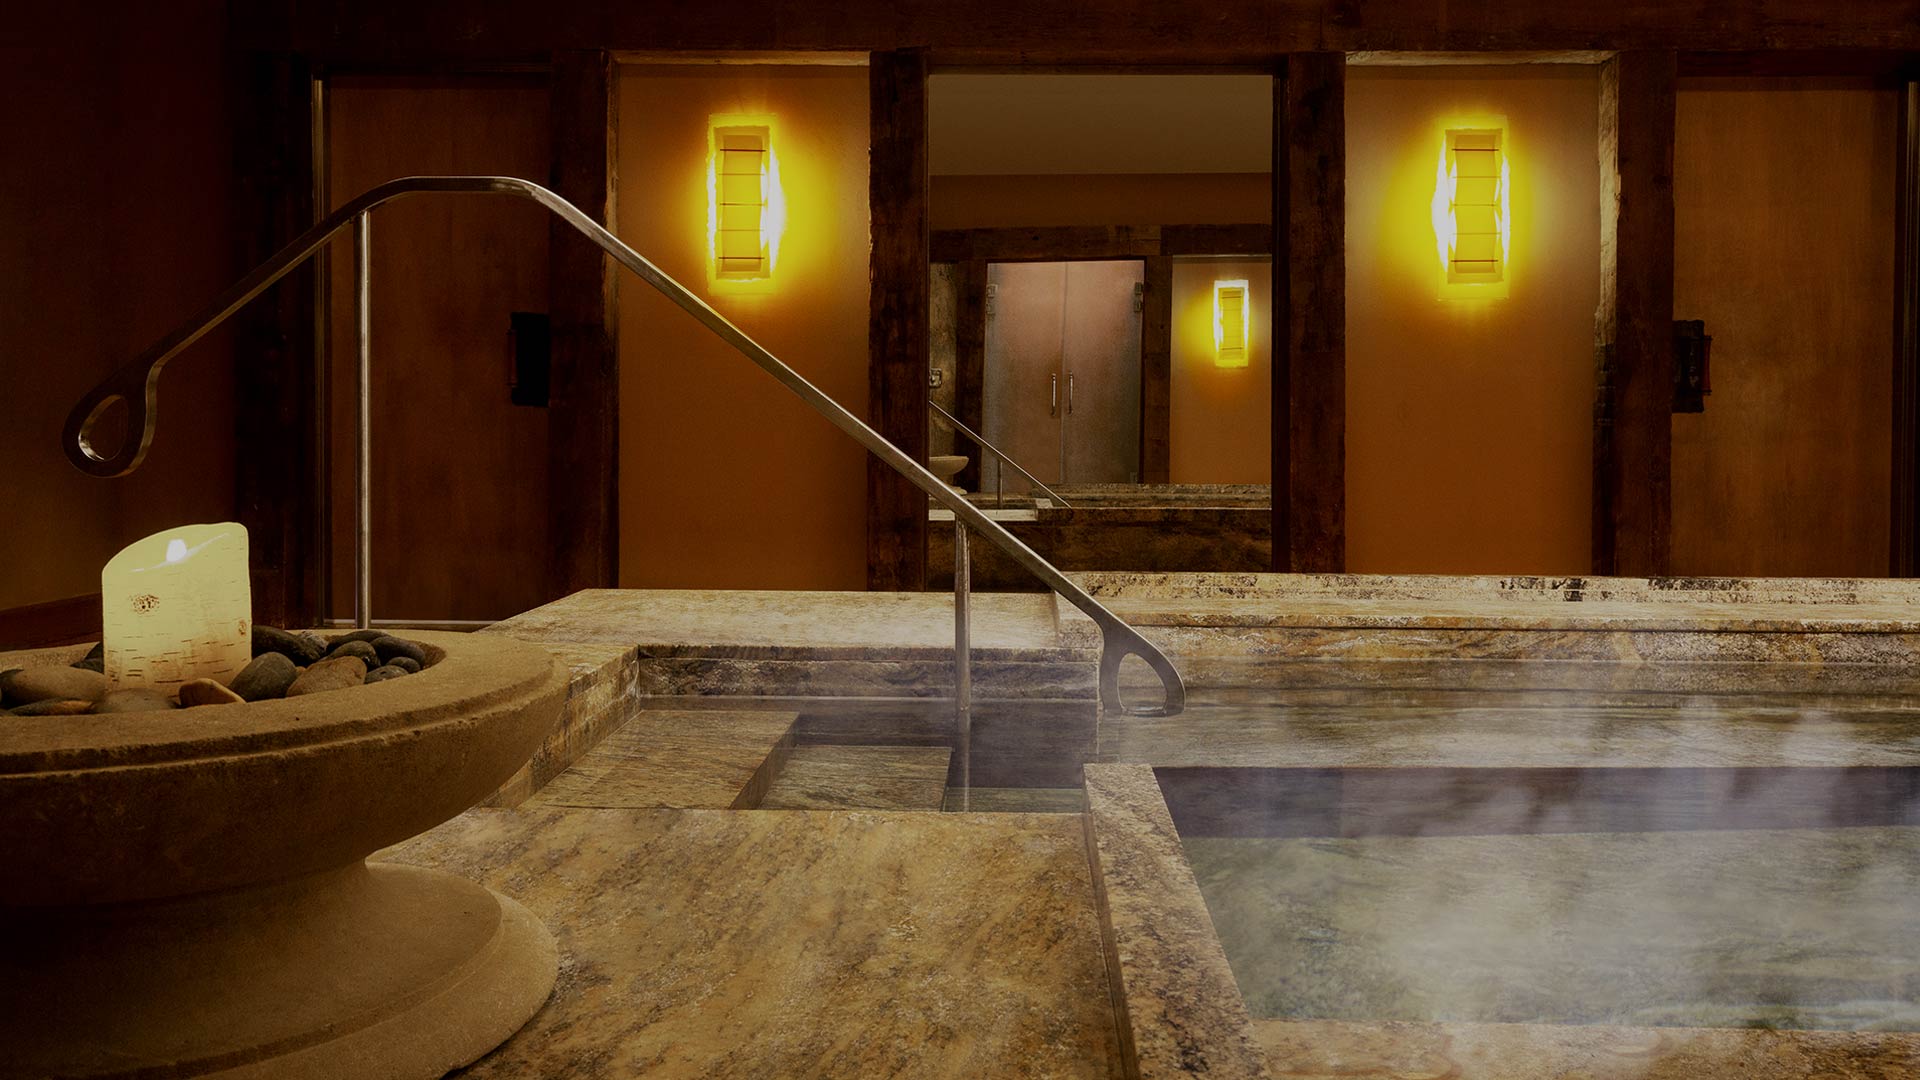 interior shot of a spa hot tub. there is soft lighting, lit candles and steam rising from the hot tub